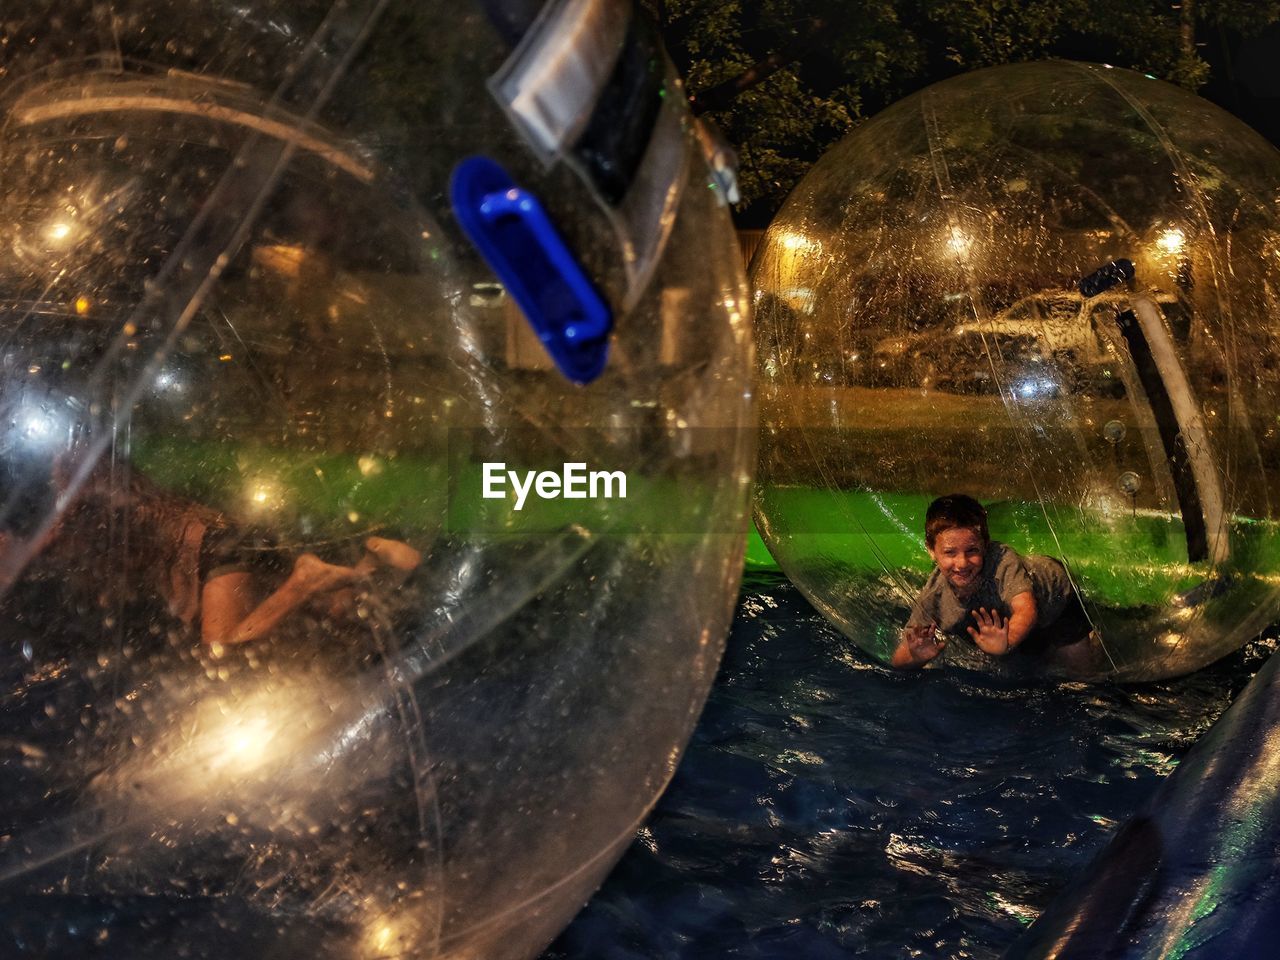 Boy in zorb ball floating on water at gage county fair during night